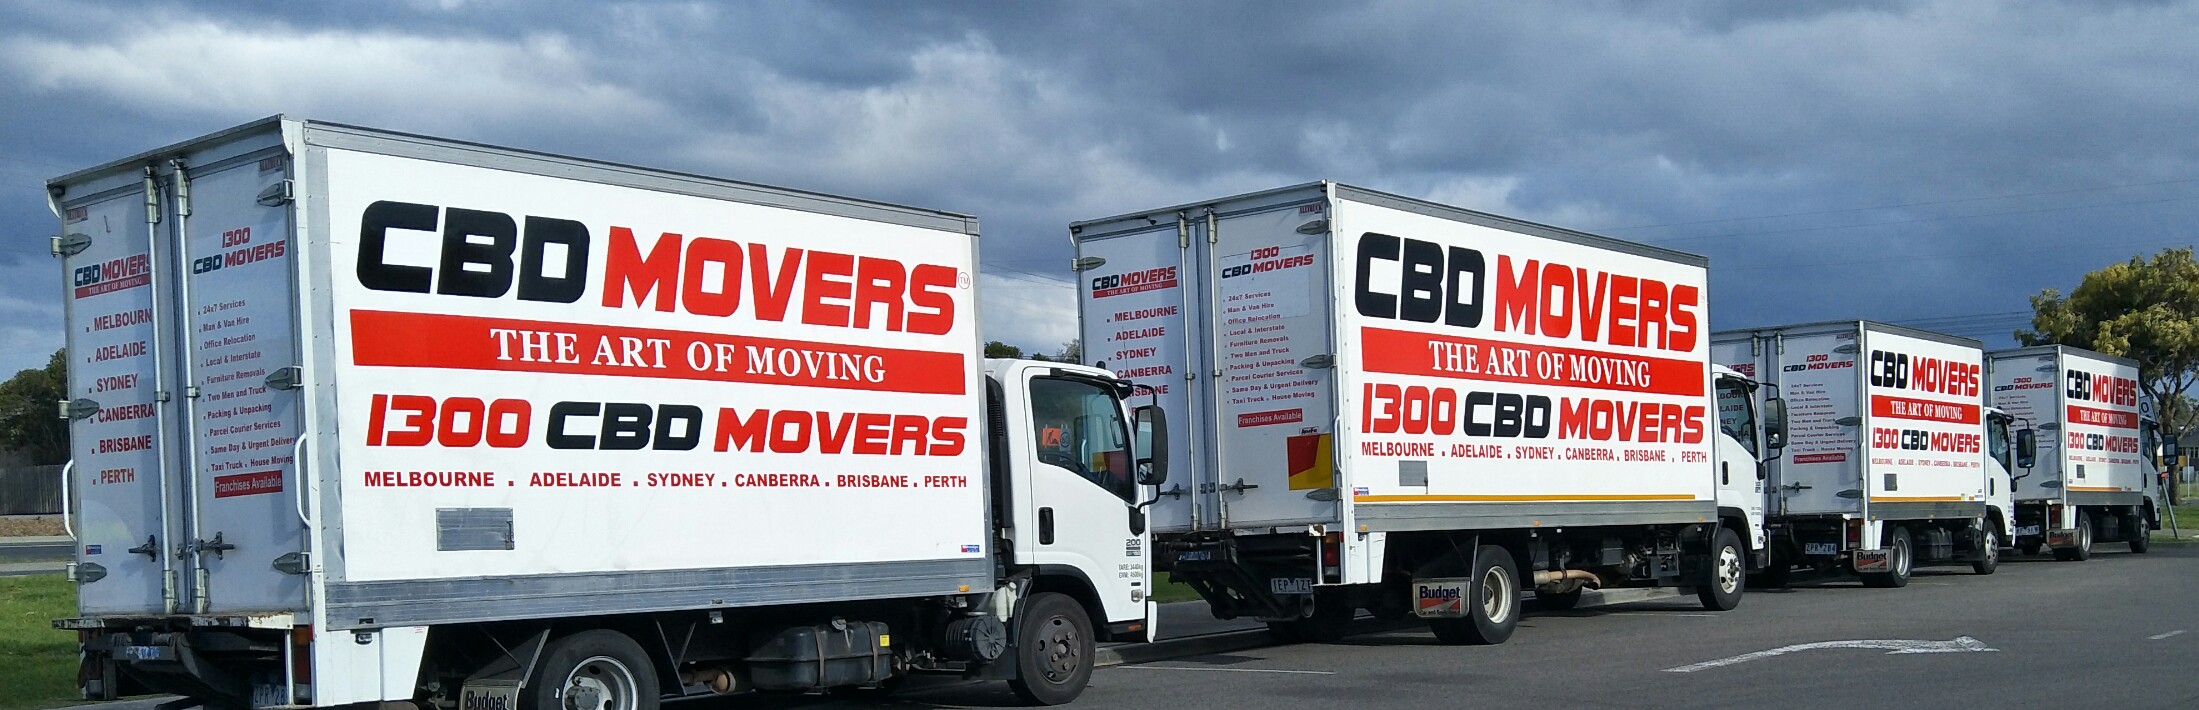 Revisiting 2020 - with CBD Movers Australia